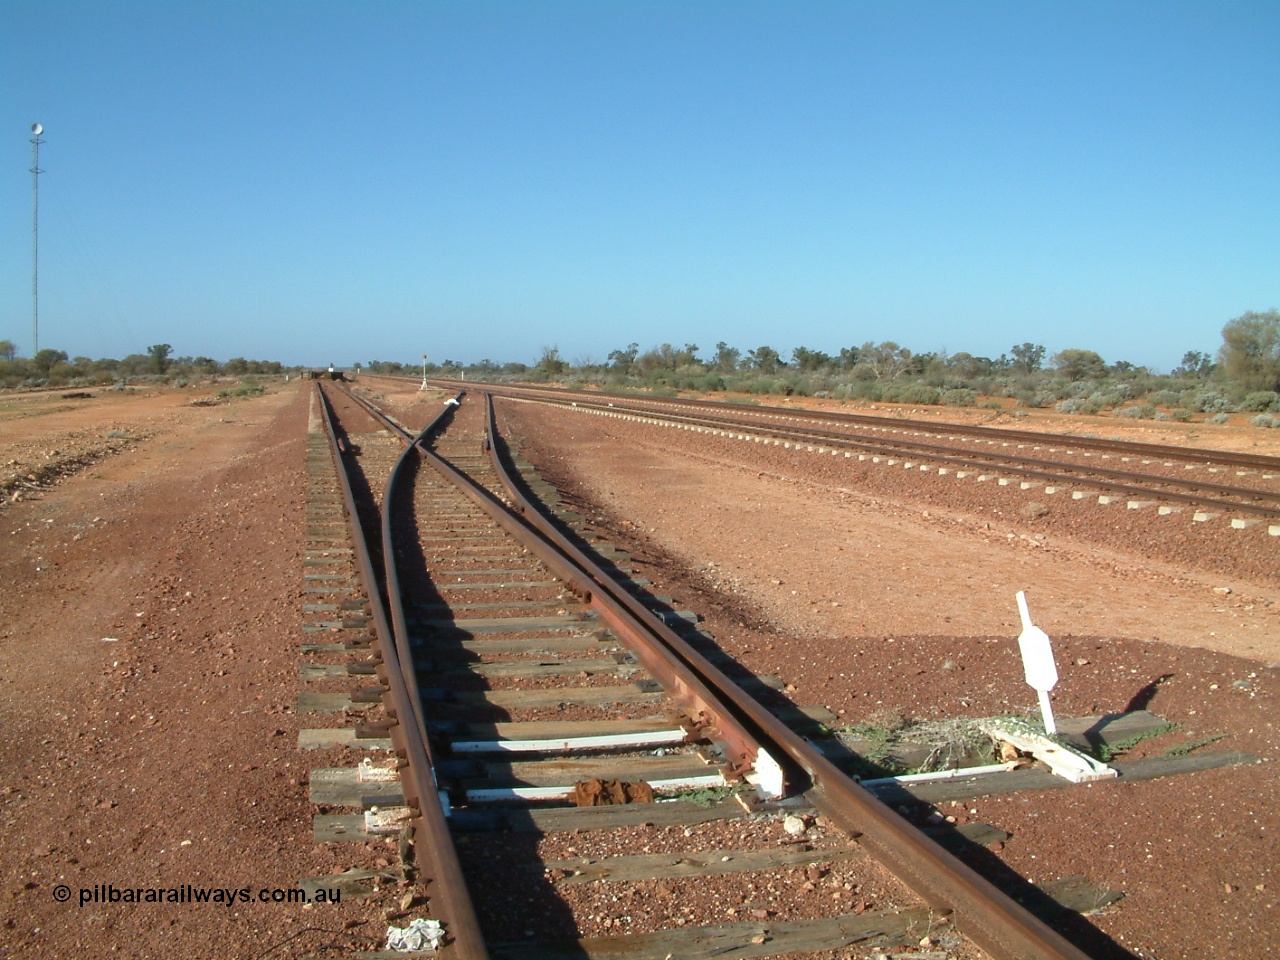 030416 083850
Carnes Siding located at the 566.4 km on the Central Australian line from Tarcoola to Alice Springs. Looking south from the goods siding off the loop with deadend siding to loading ramp, communications tower at left. [url=https://goo.gl/maps/SFbQb2qfyMiVfcXq7]GeoData location[/url]. 16th April 2003.
